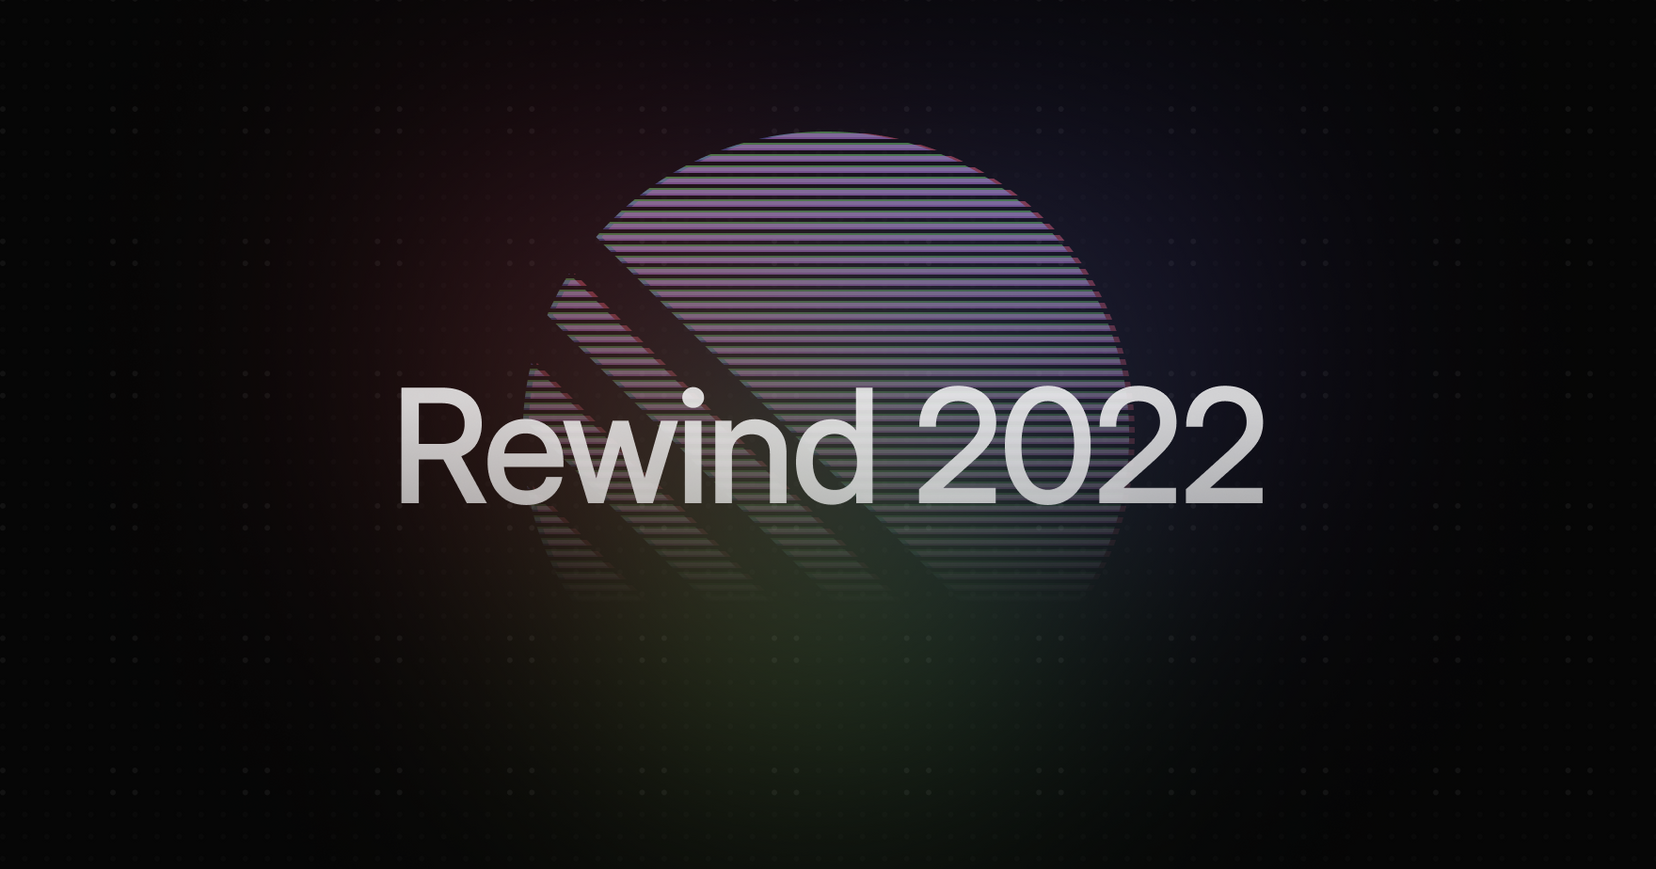 A promo image for Linear Rewind